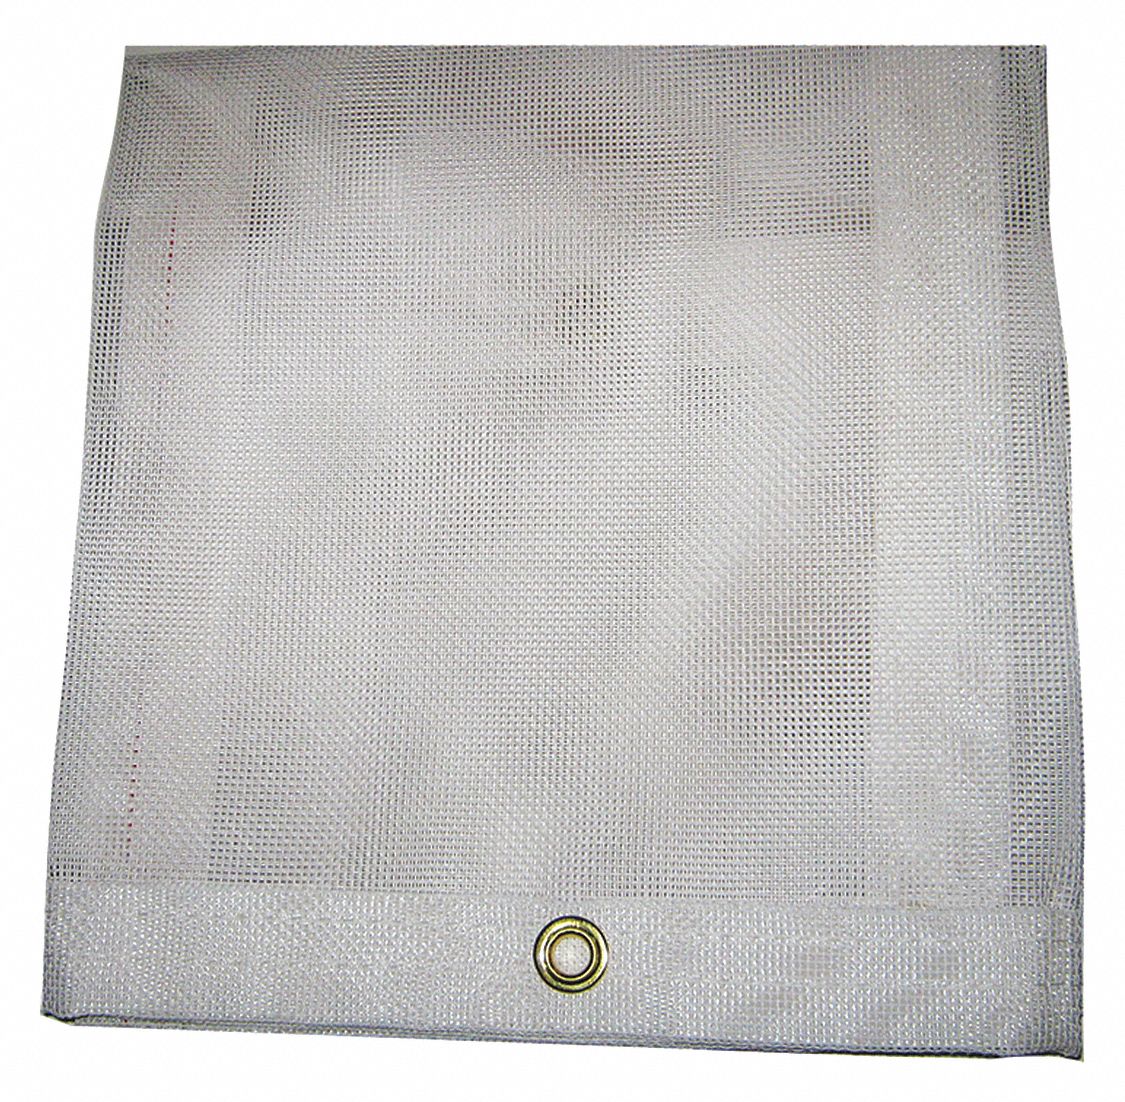 MAURITZON 5 mil Vinyl Water Resistant Mesh Tarp, White, 19 ft 6 in x 19 ft 6 in Finished Size